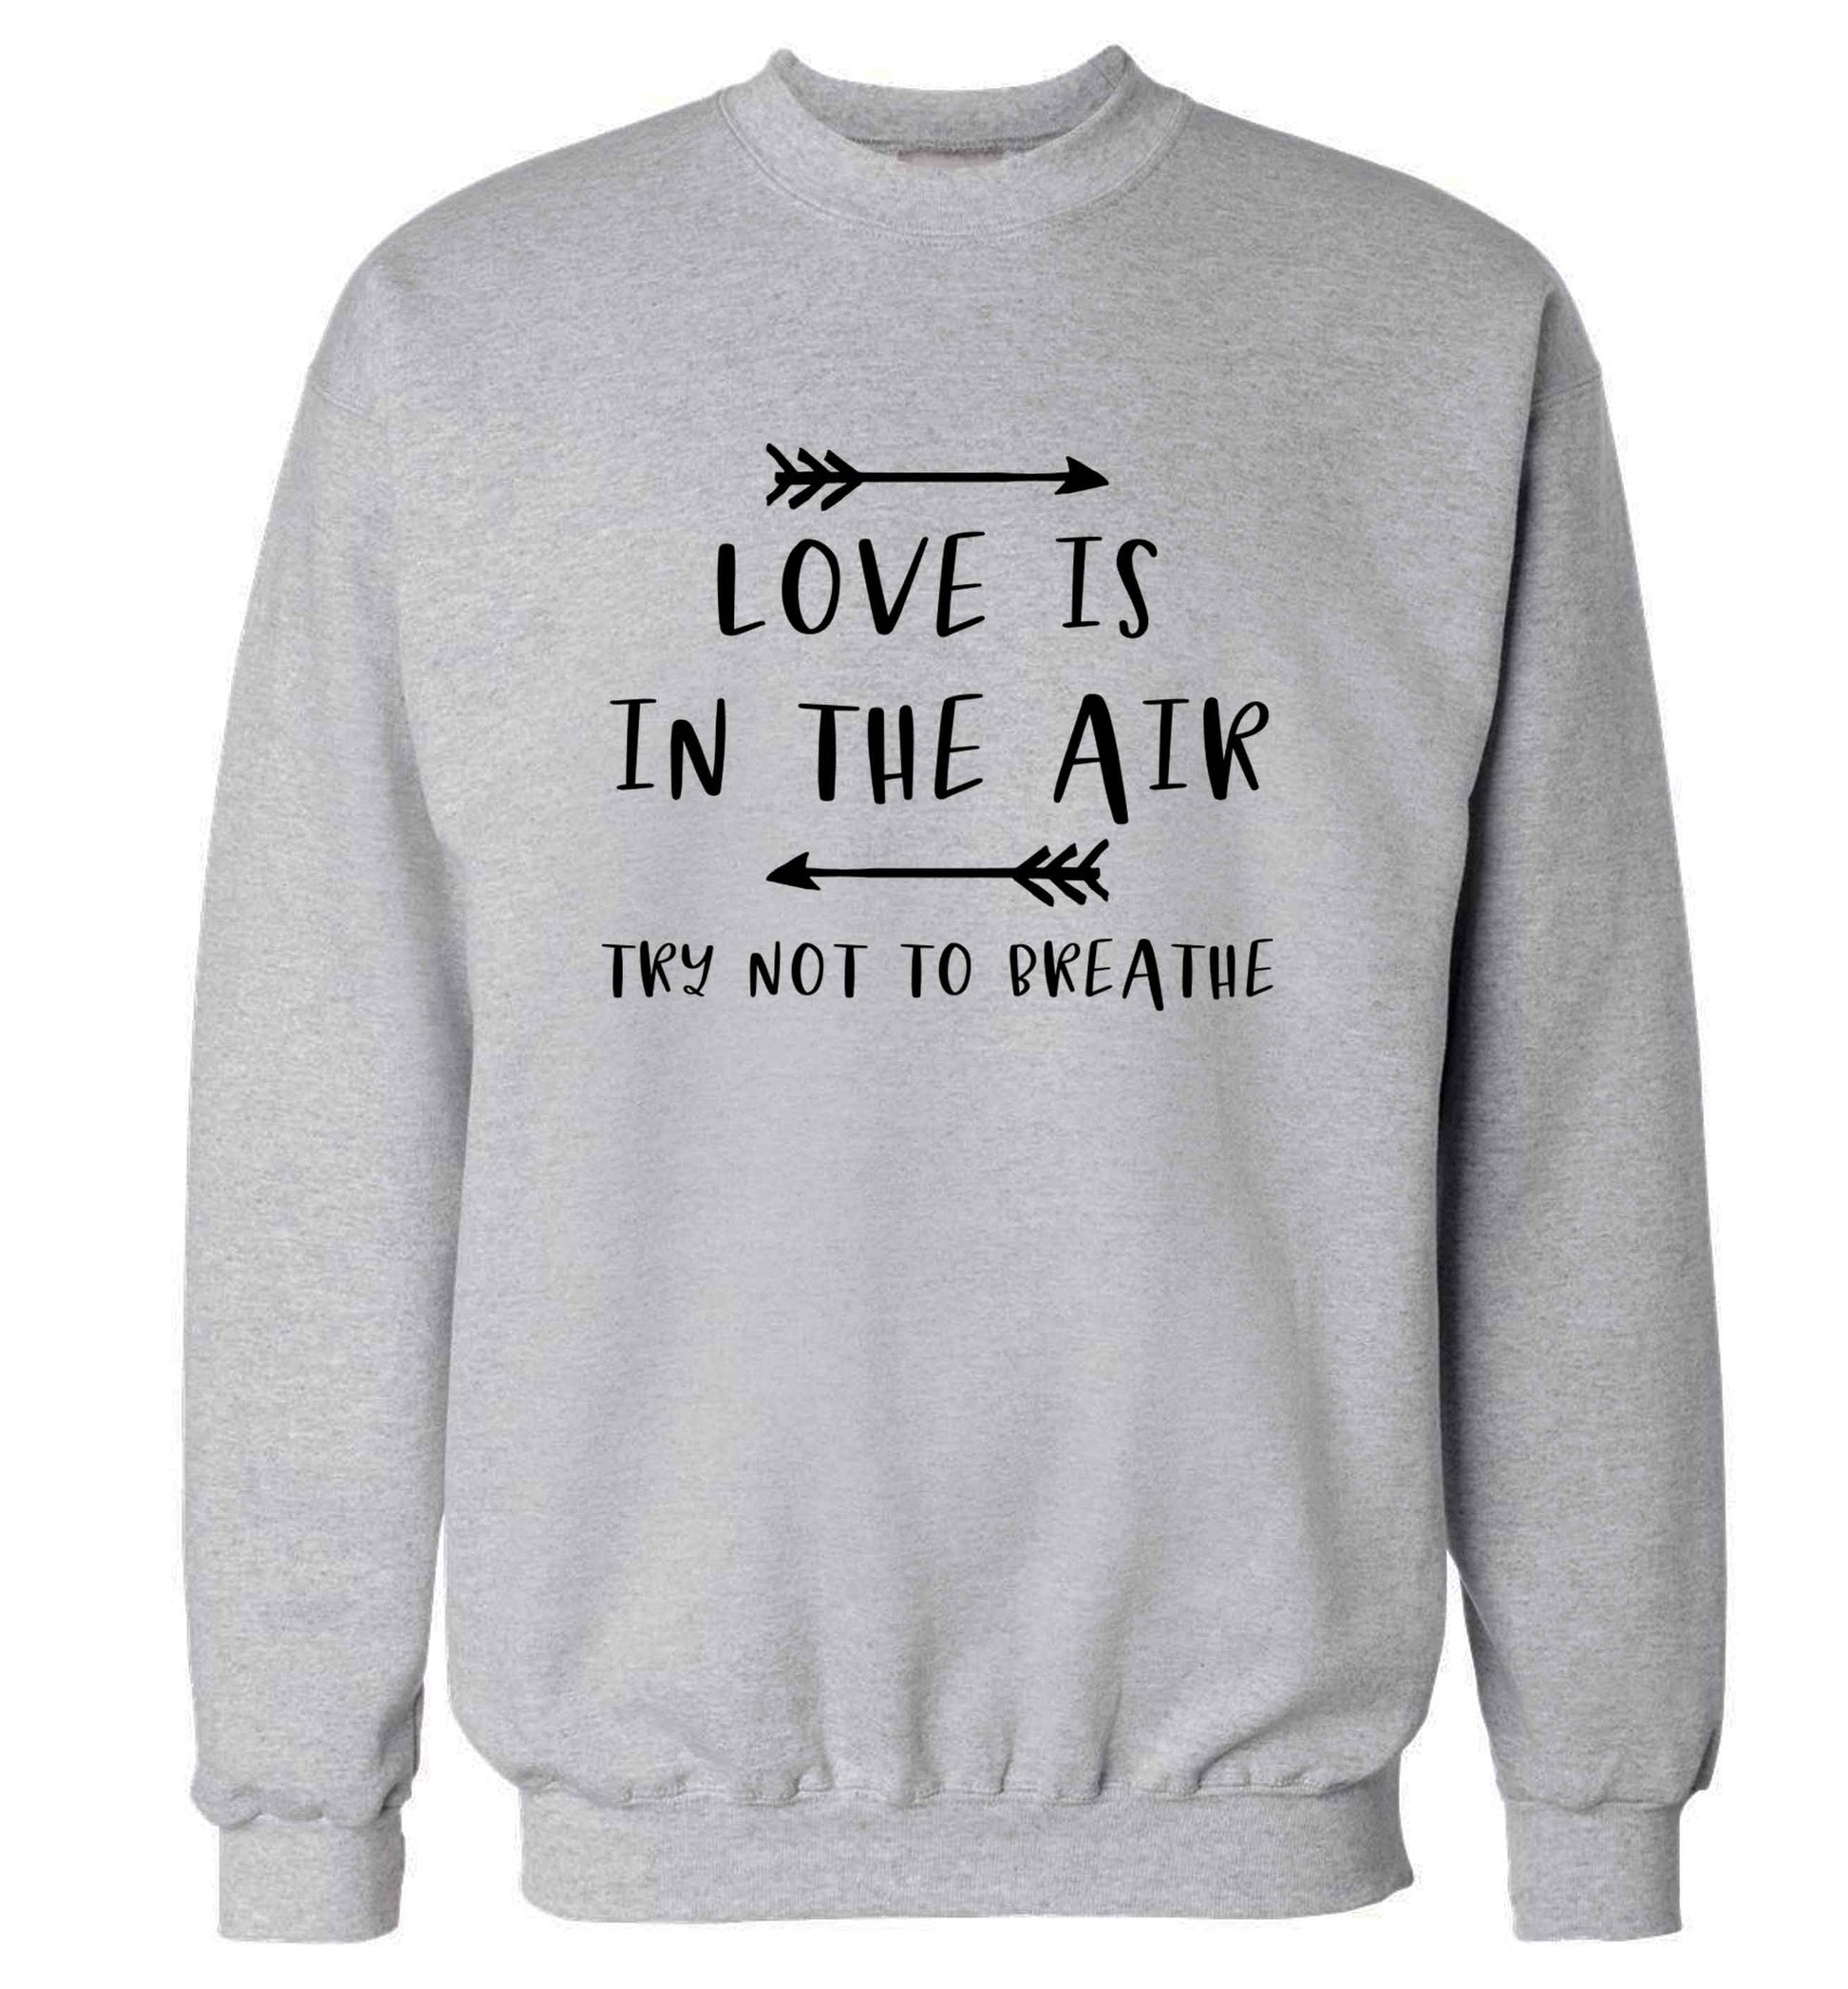 Love is in the air try not to breathe adult's unisex grey sweater 2XL